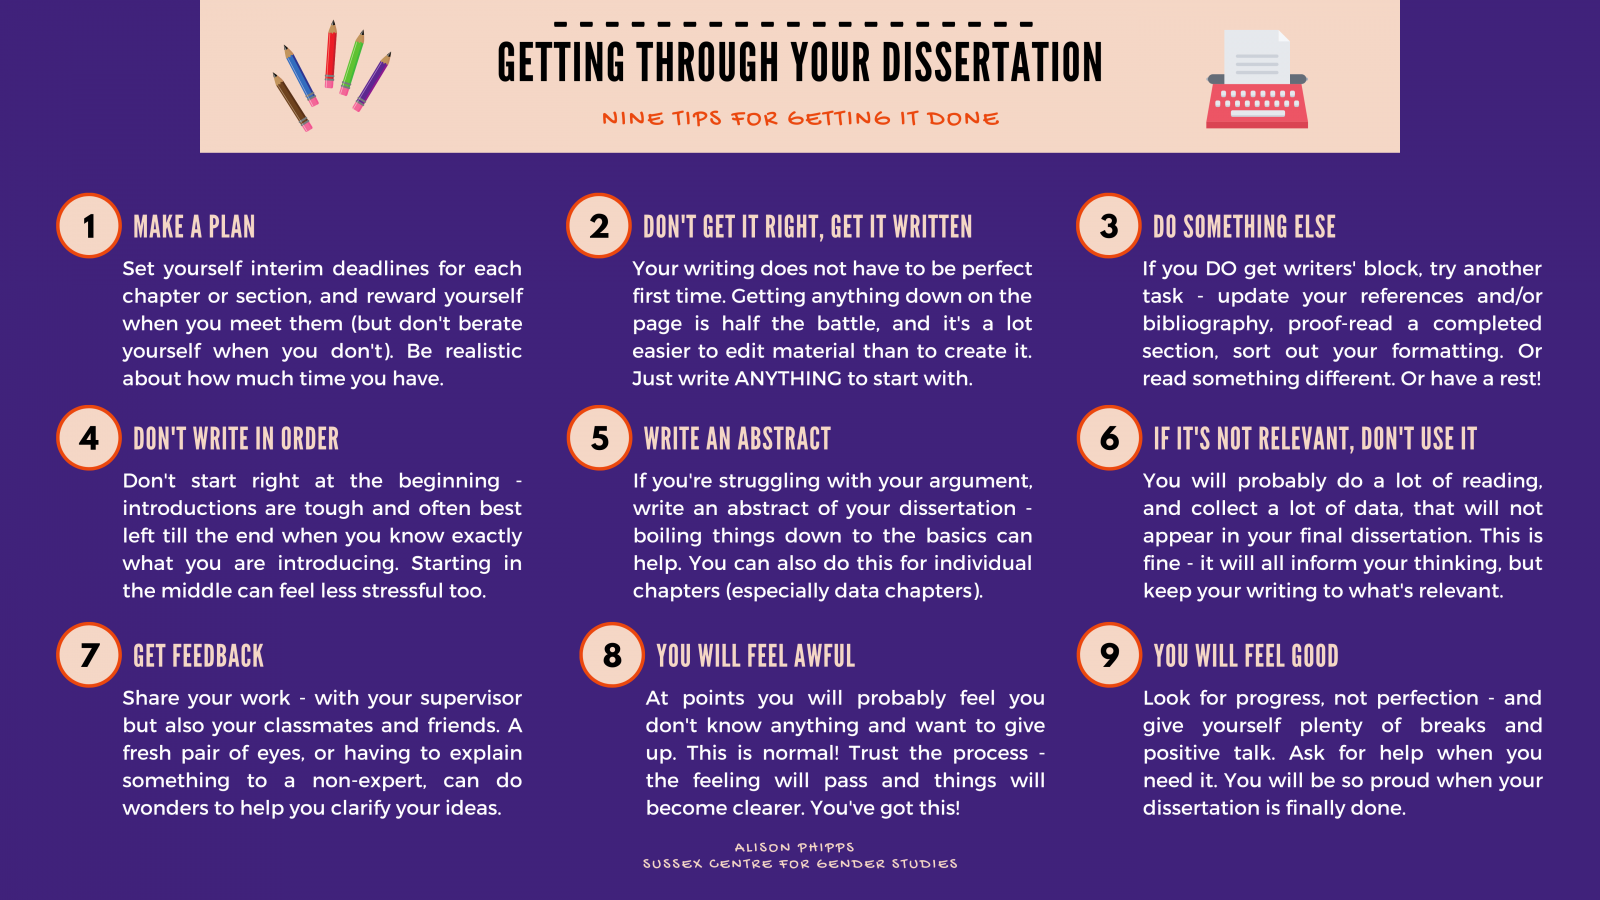 Nine tips for getting through your dissertation